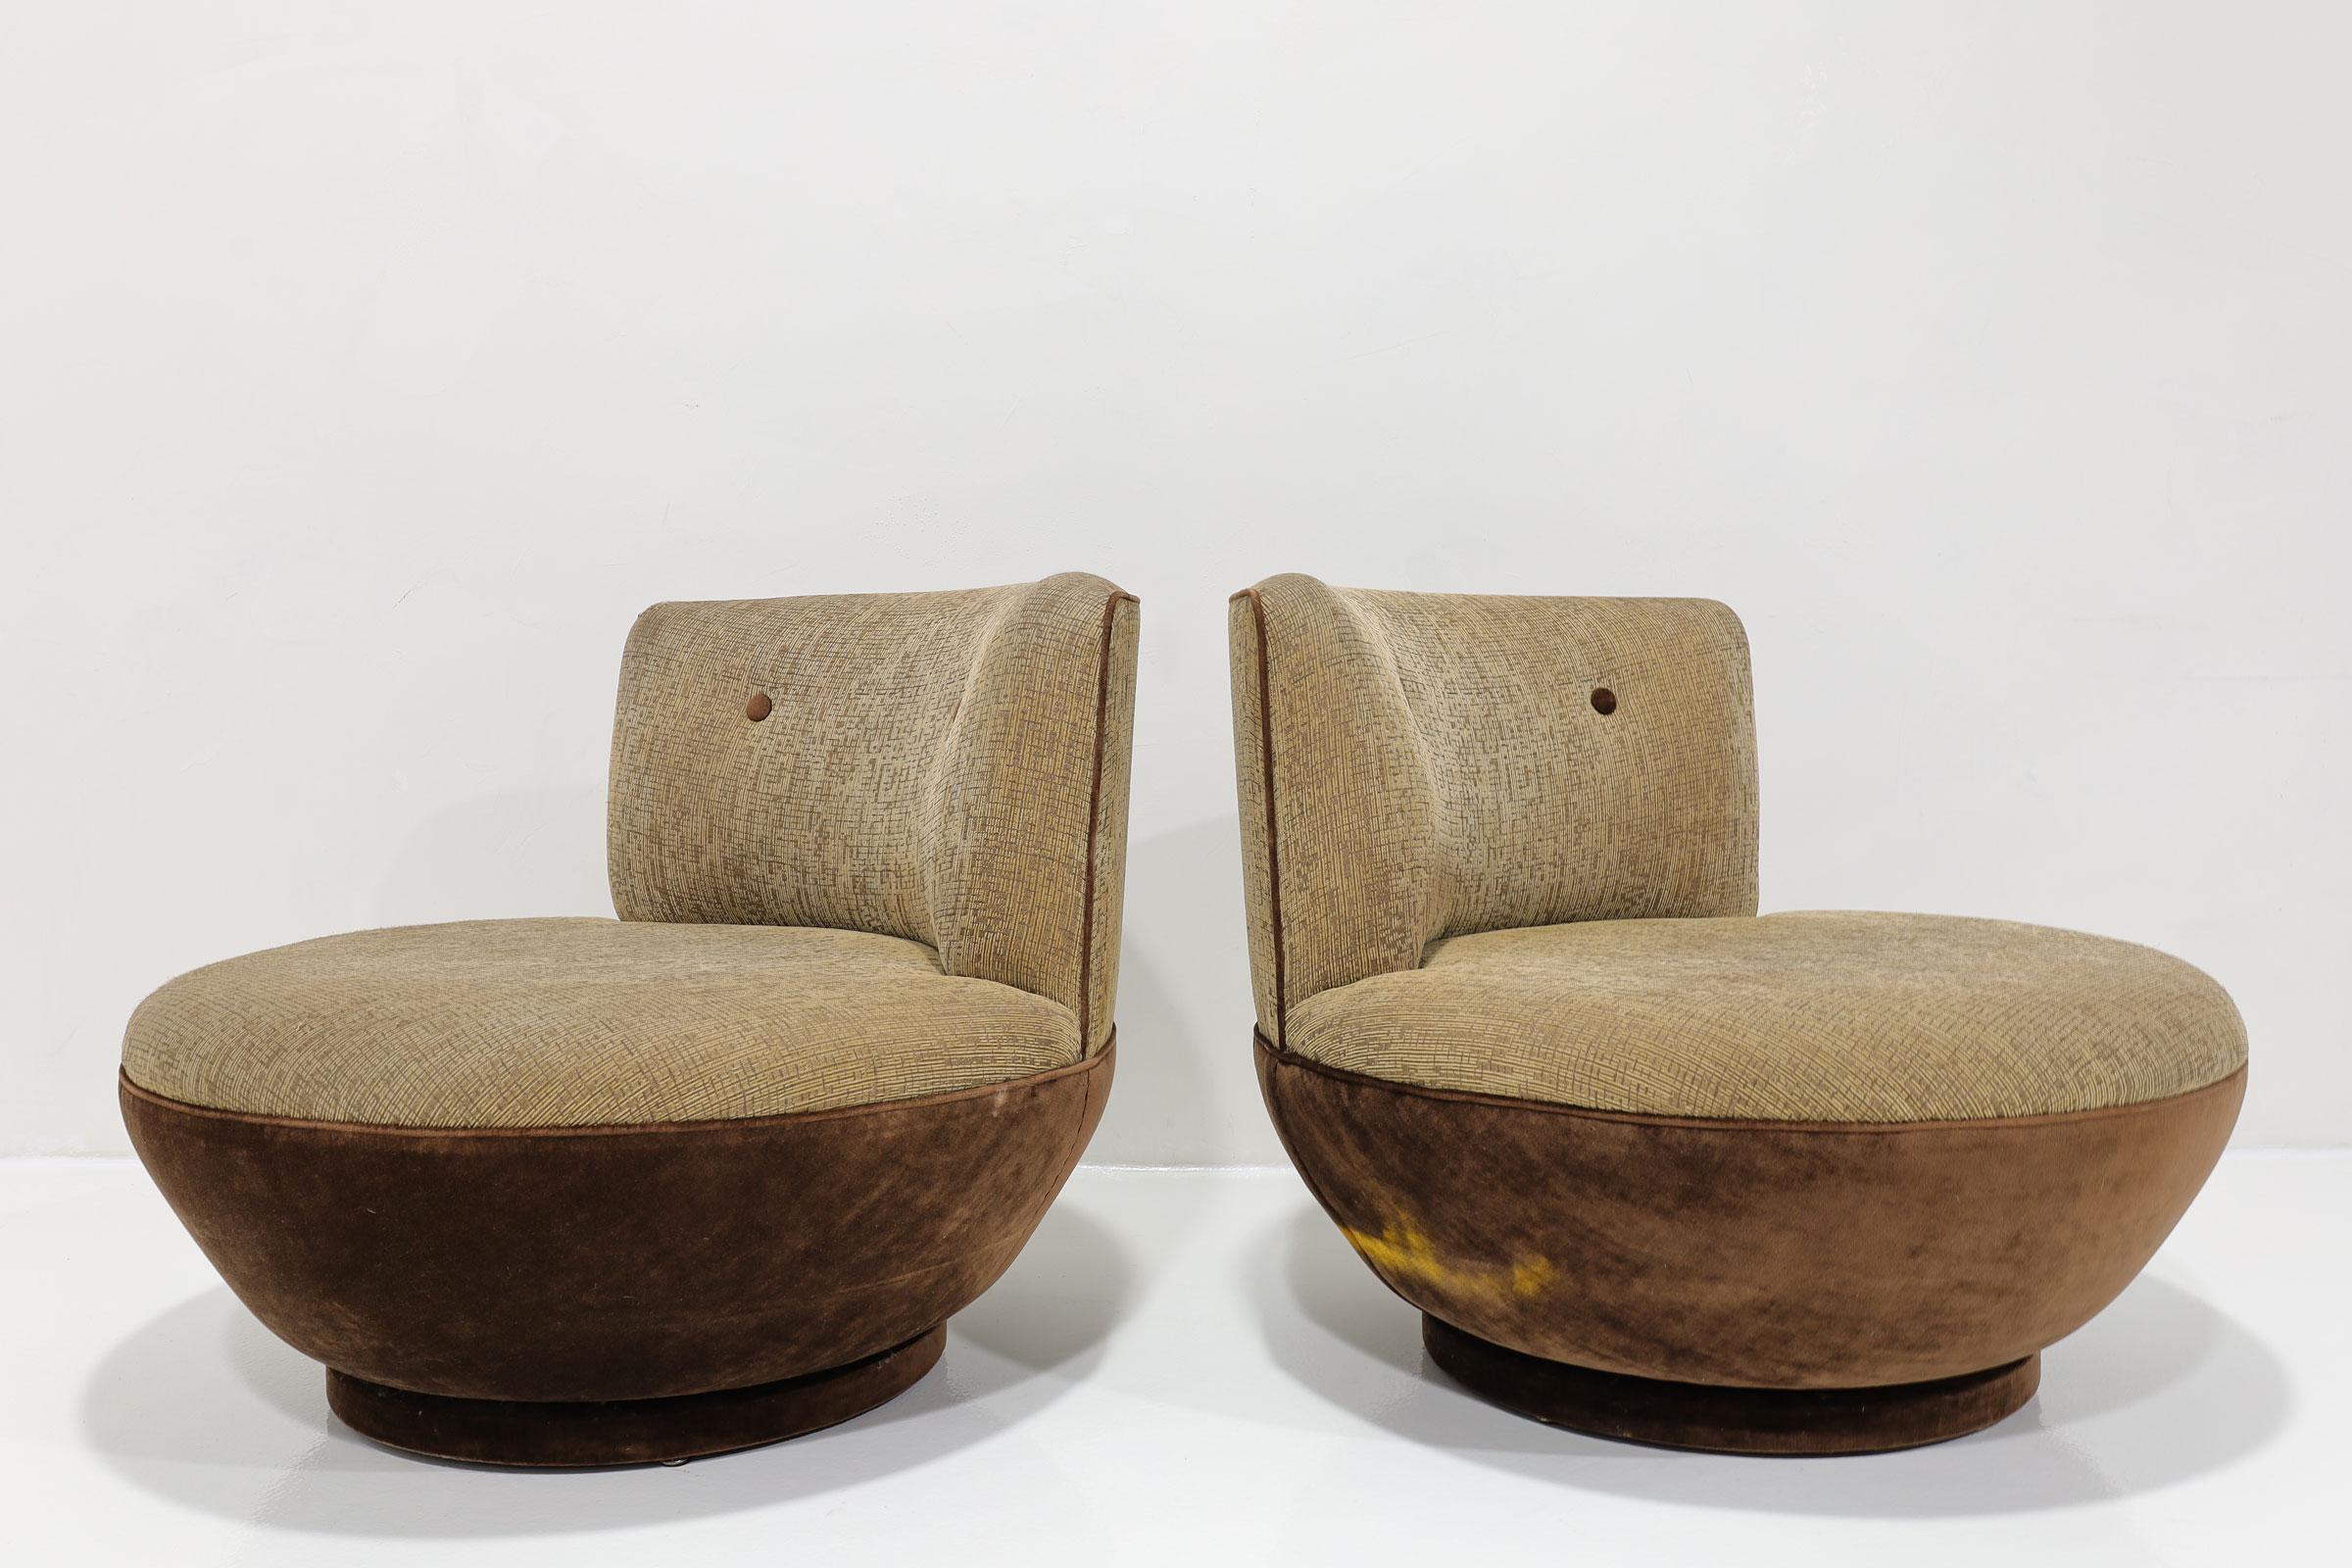 What a suite! Two super nice and comfortable swivel chairs by Milo Baughman for Thayer Coggin. We can help with reupholstery if you would like, or these look great if you like a vintage look. We ahve the matching sofa with another set of swivels